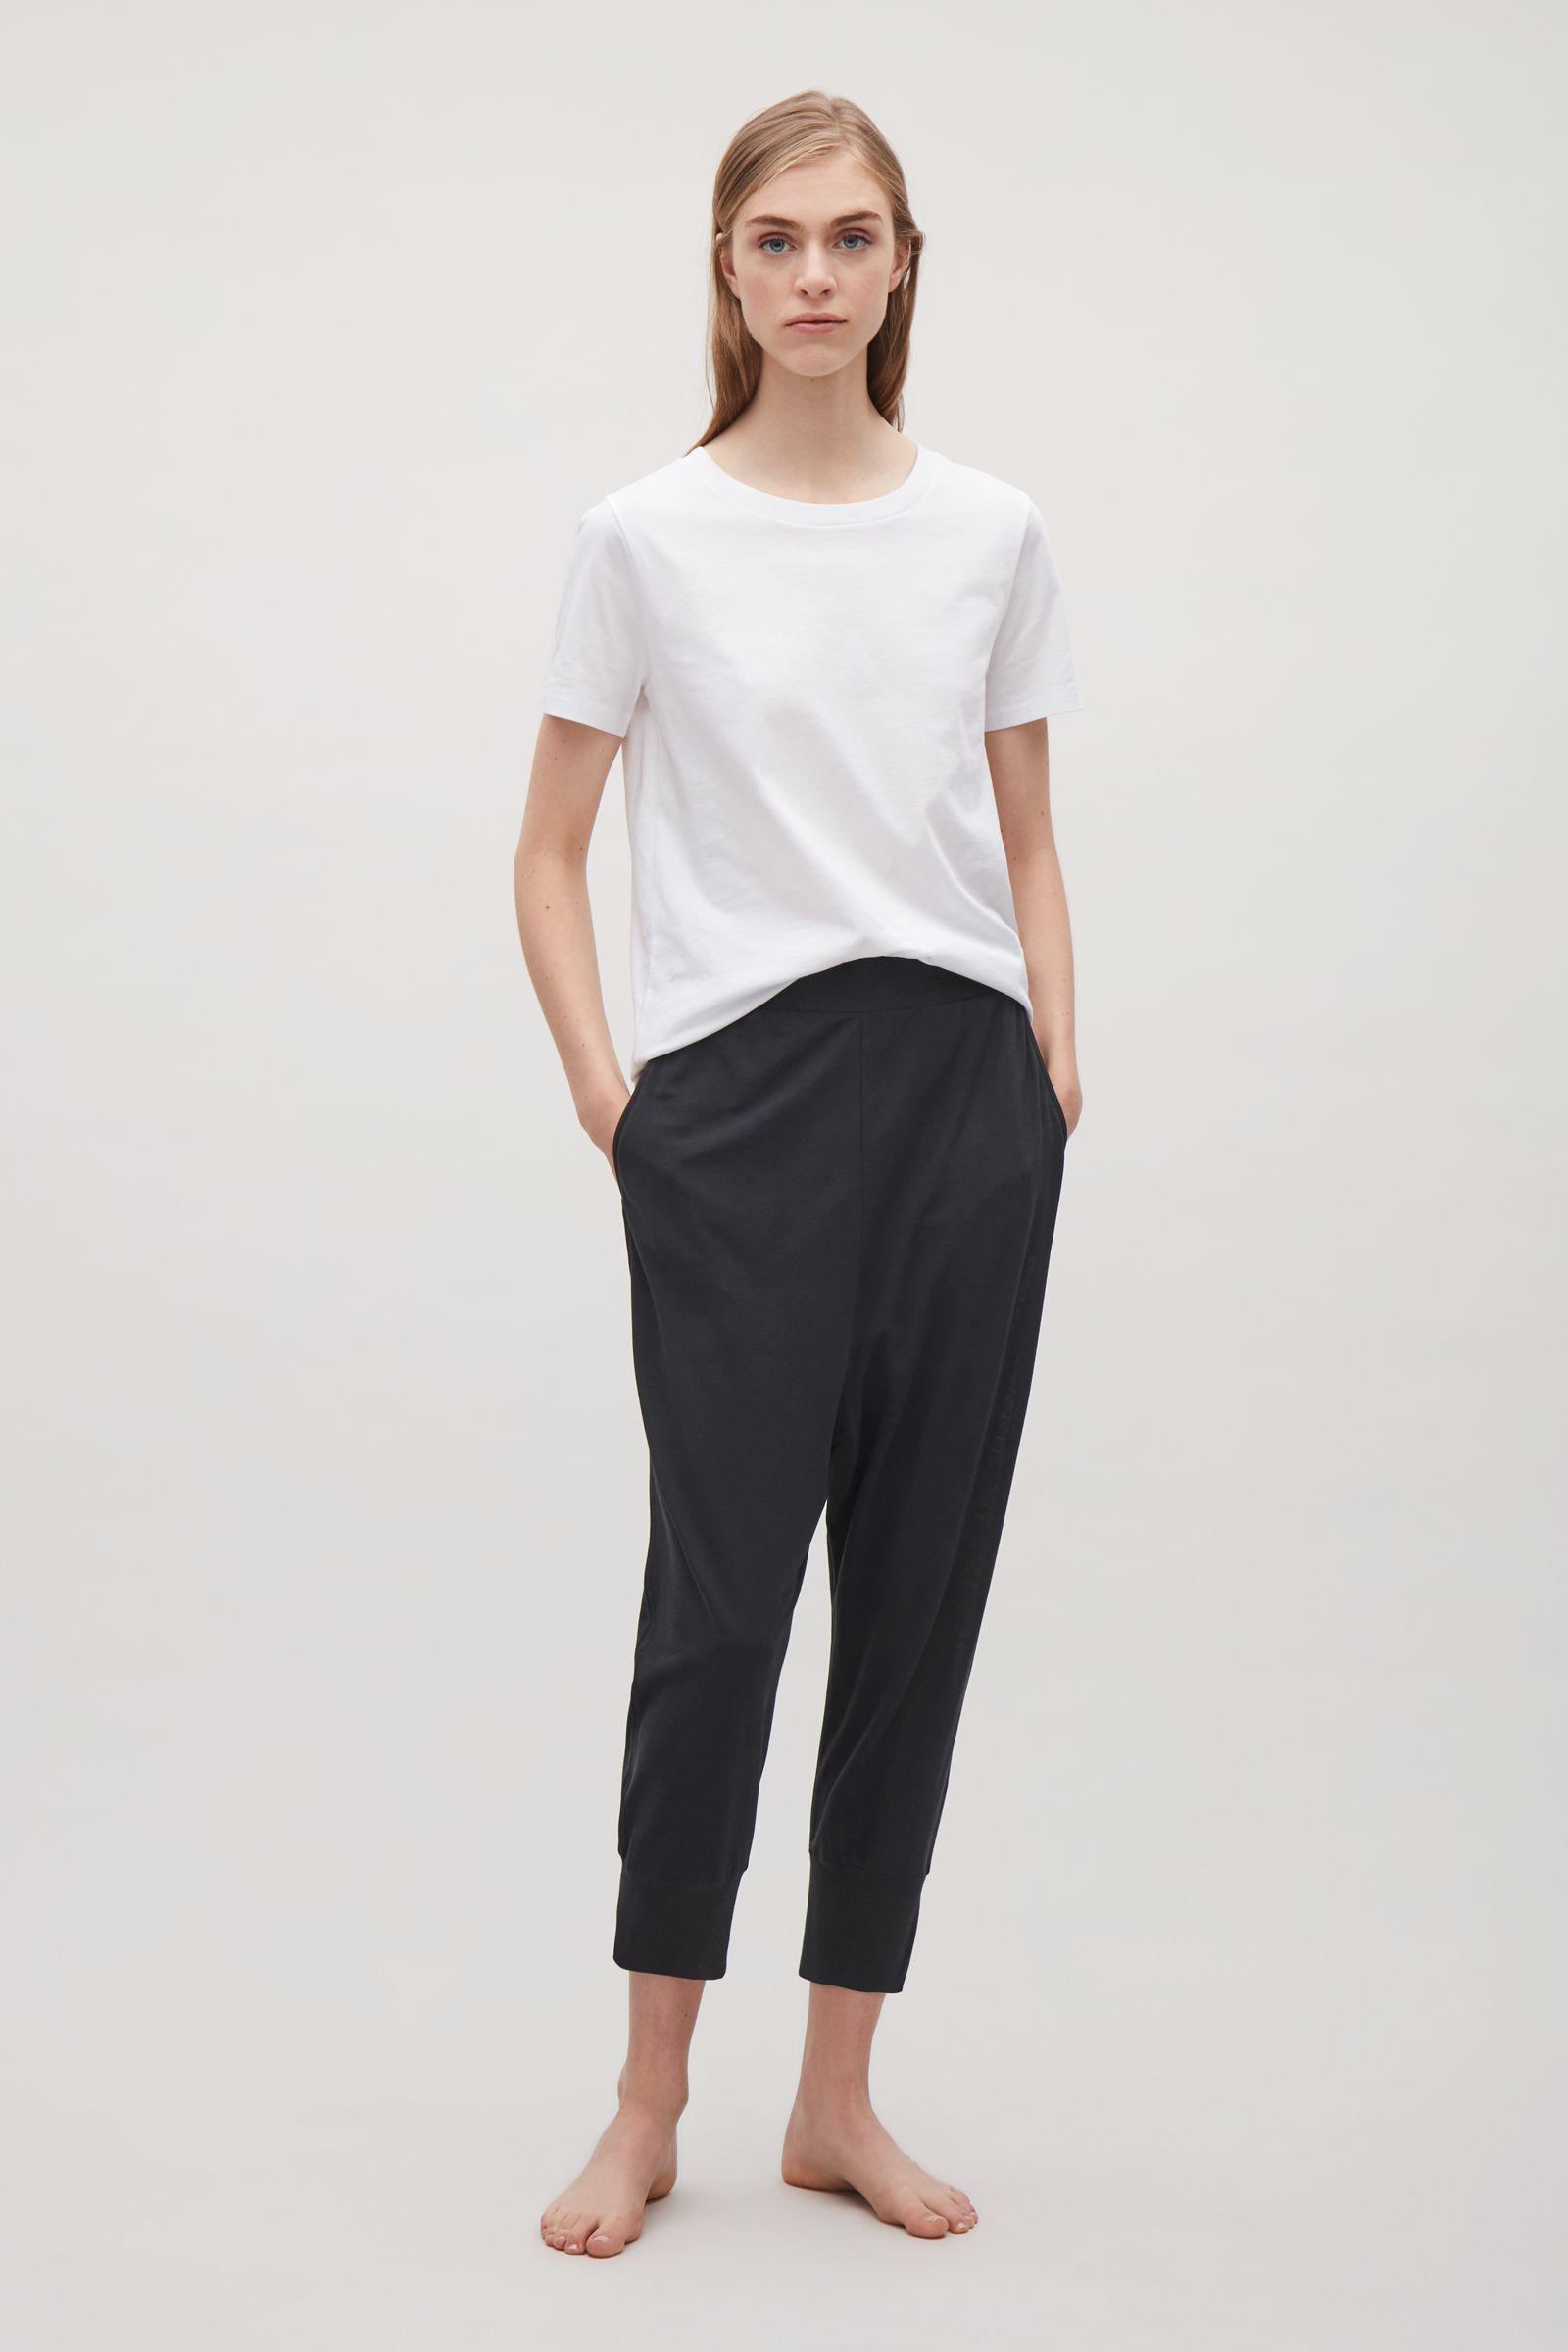 COS Cotton Drop-crotch Jersey Trousers in Black - Lyst